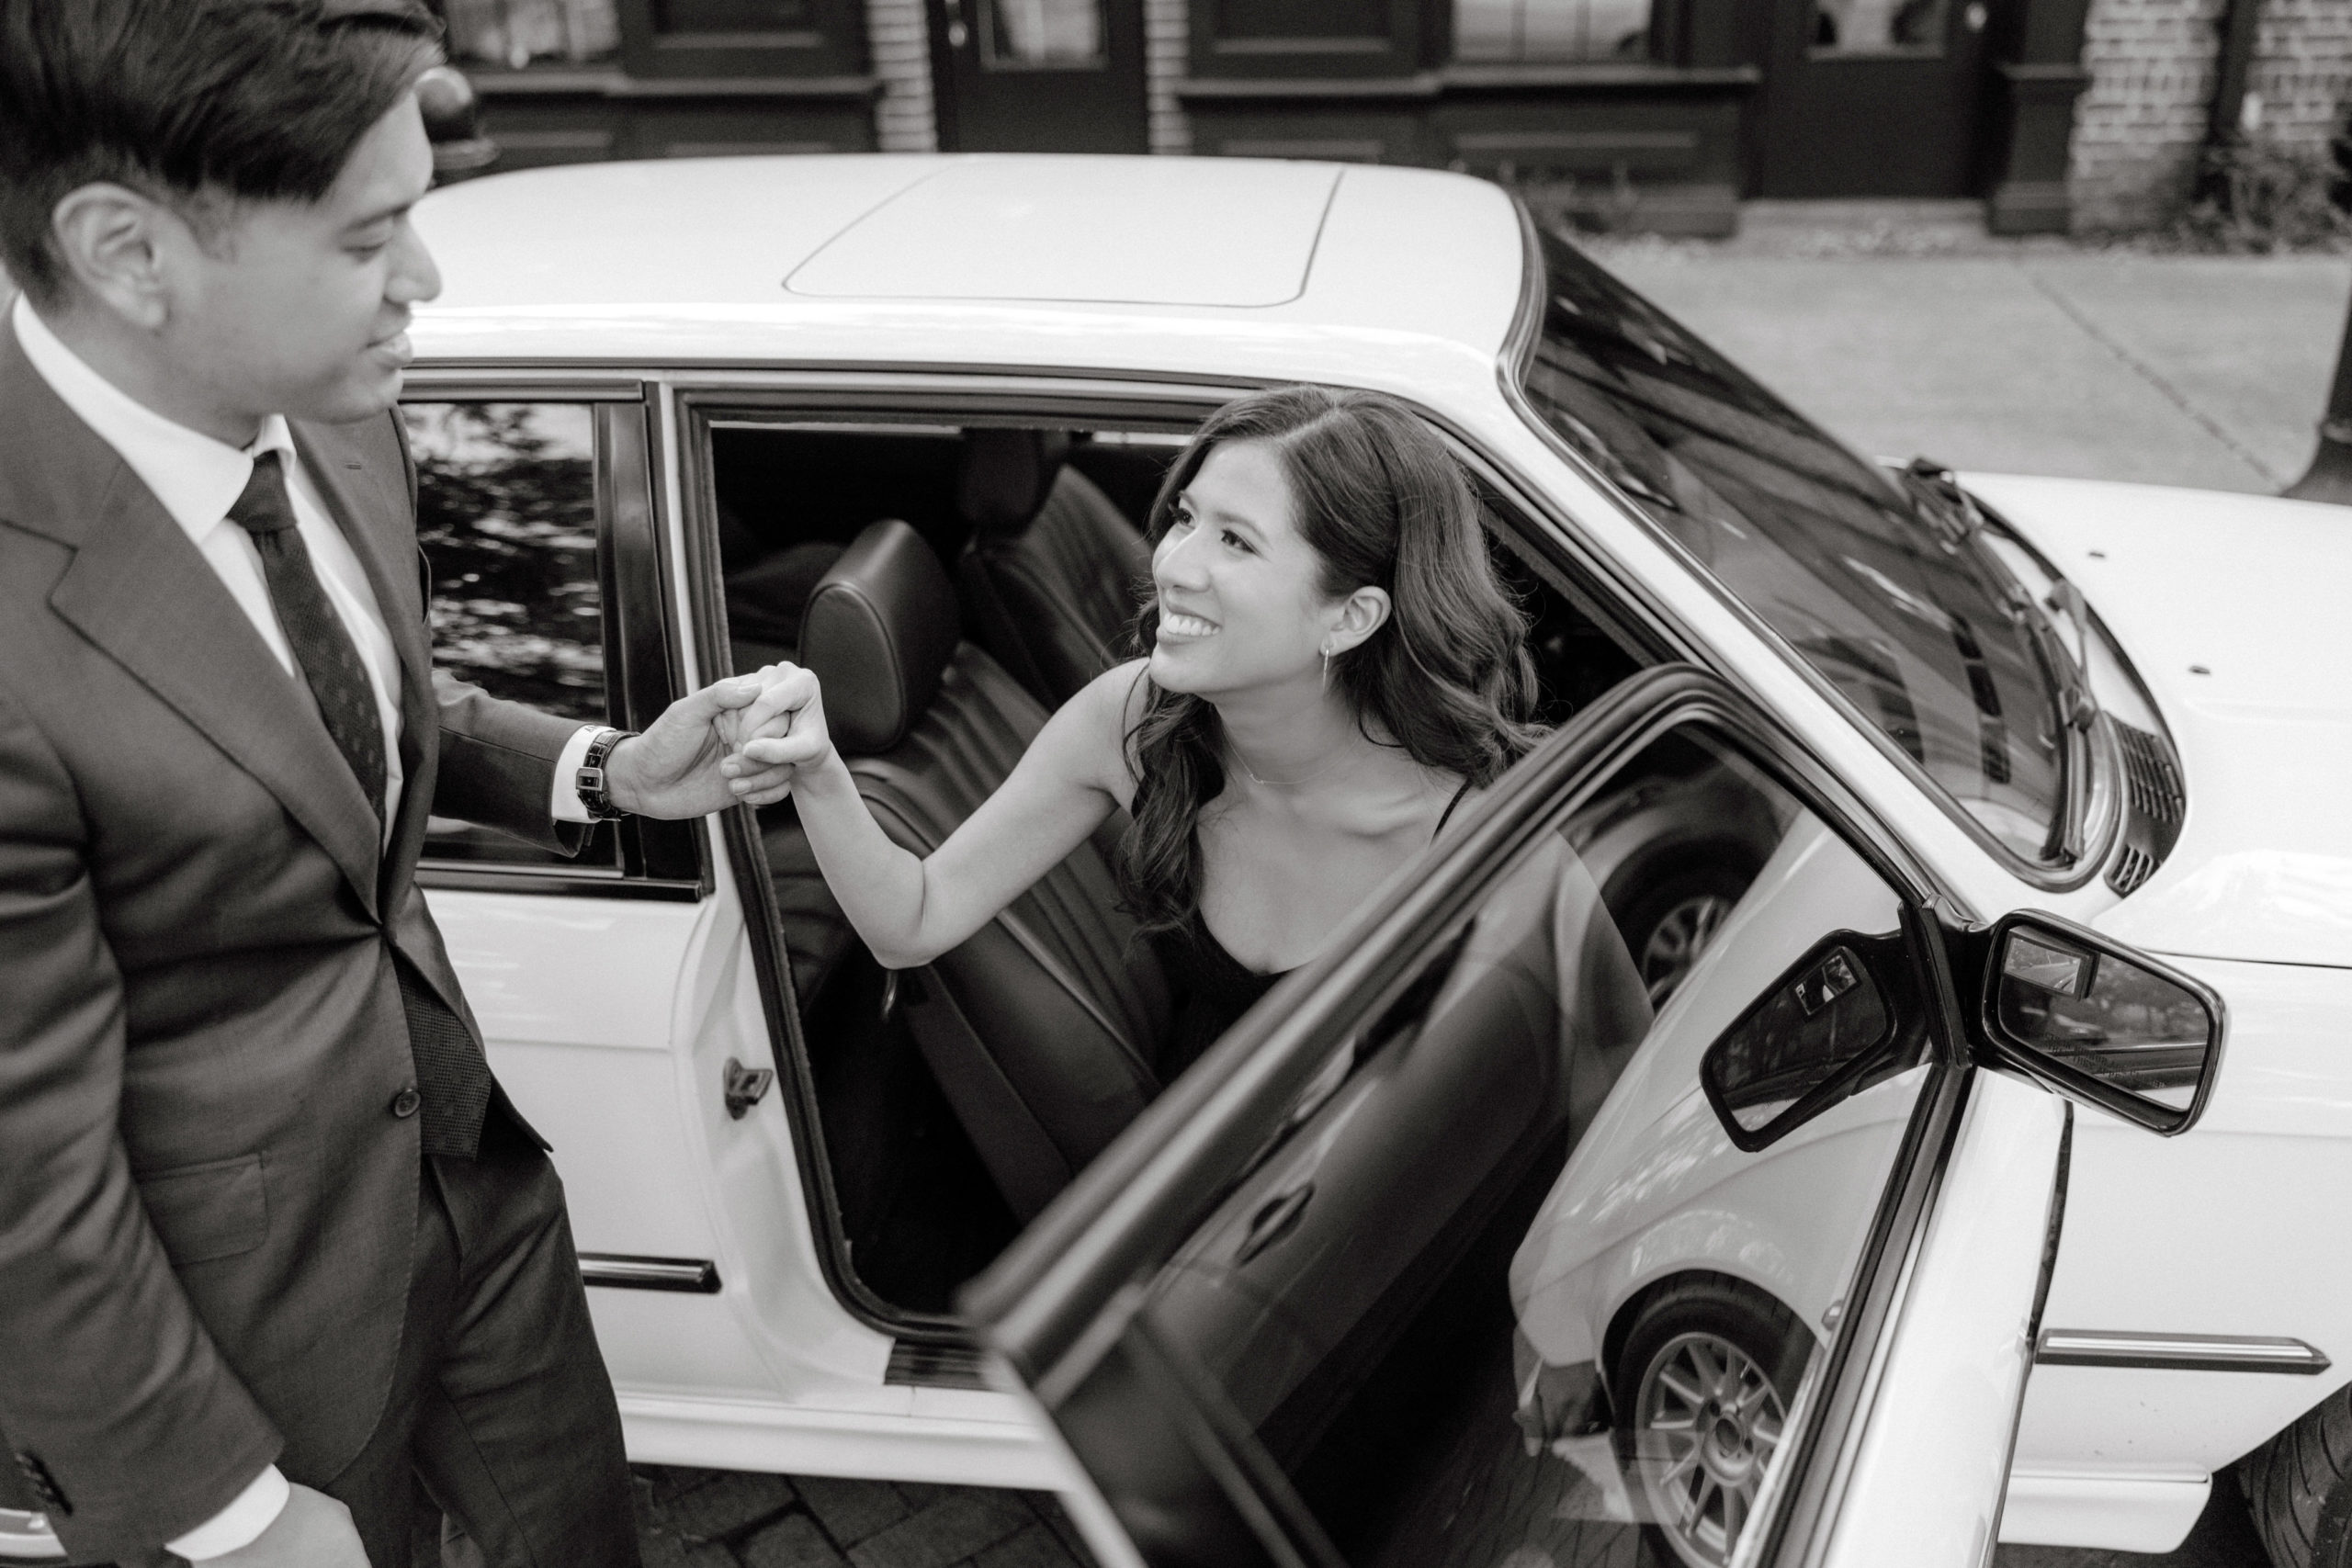 Black and white image of the man escorting his fiancée as she goes out of the car. Engagement photos by Jenny Fu Studio